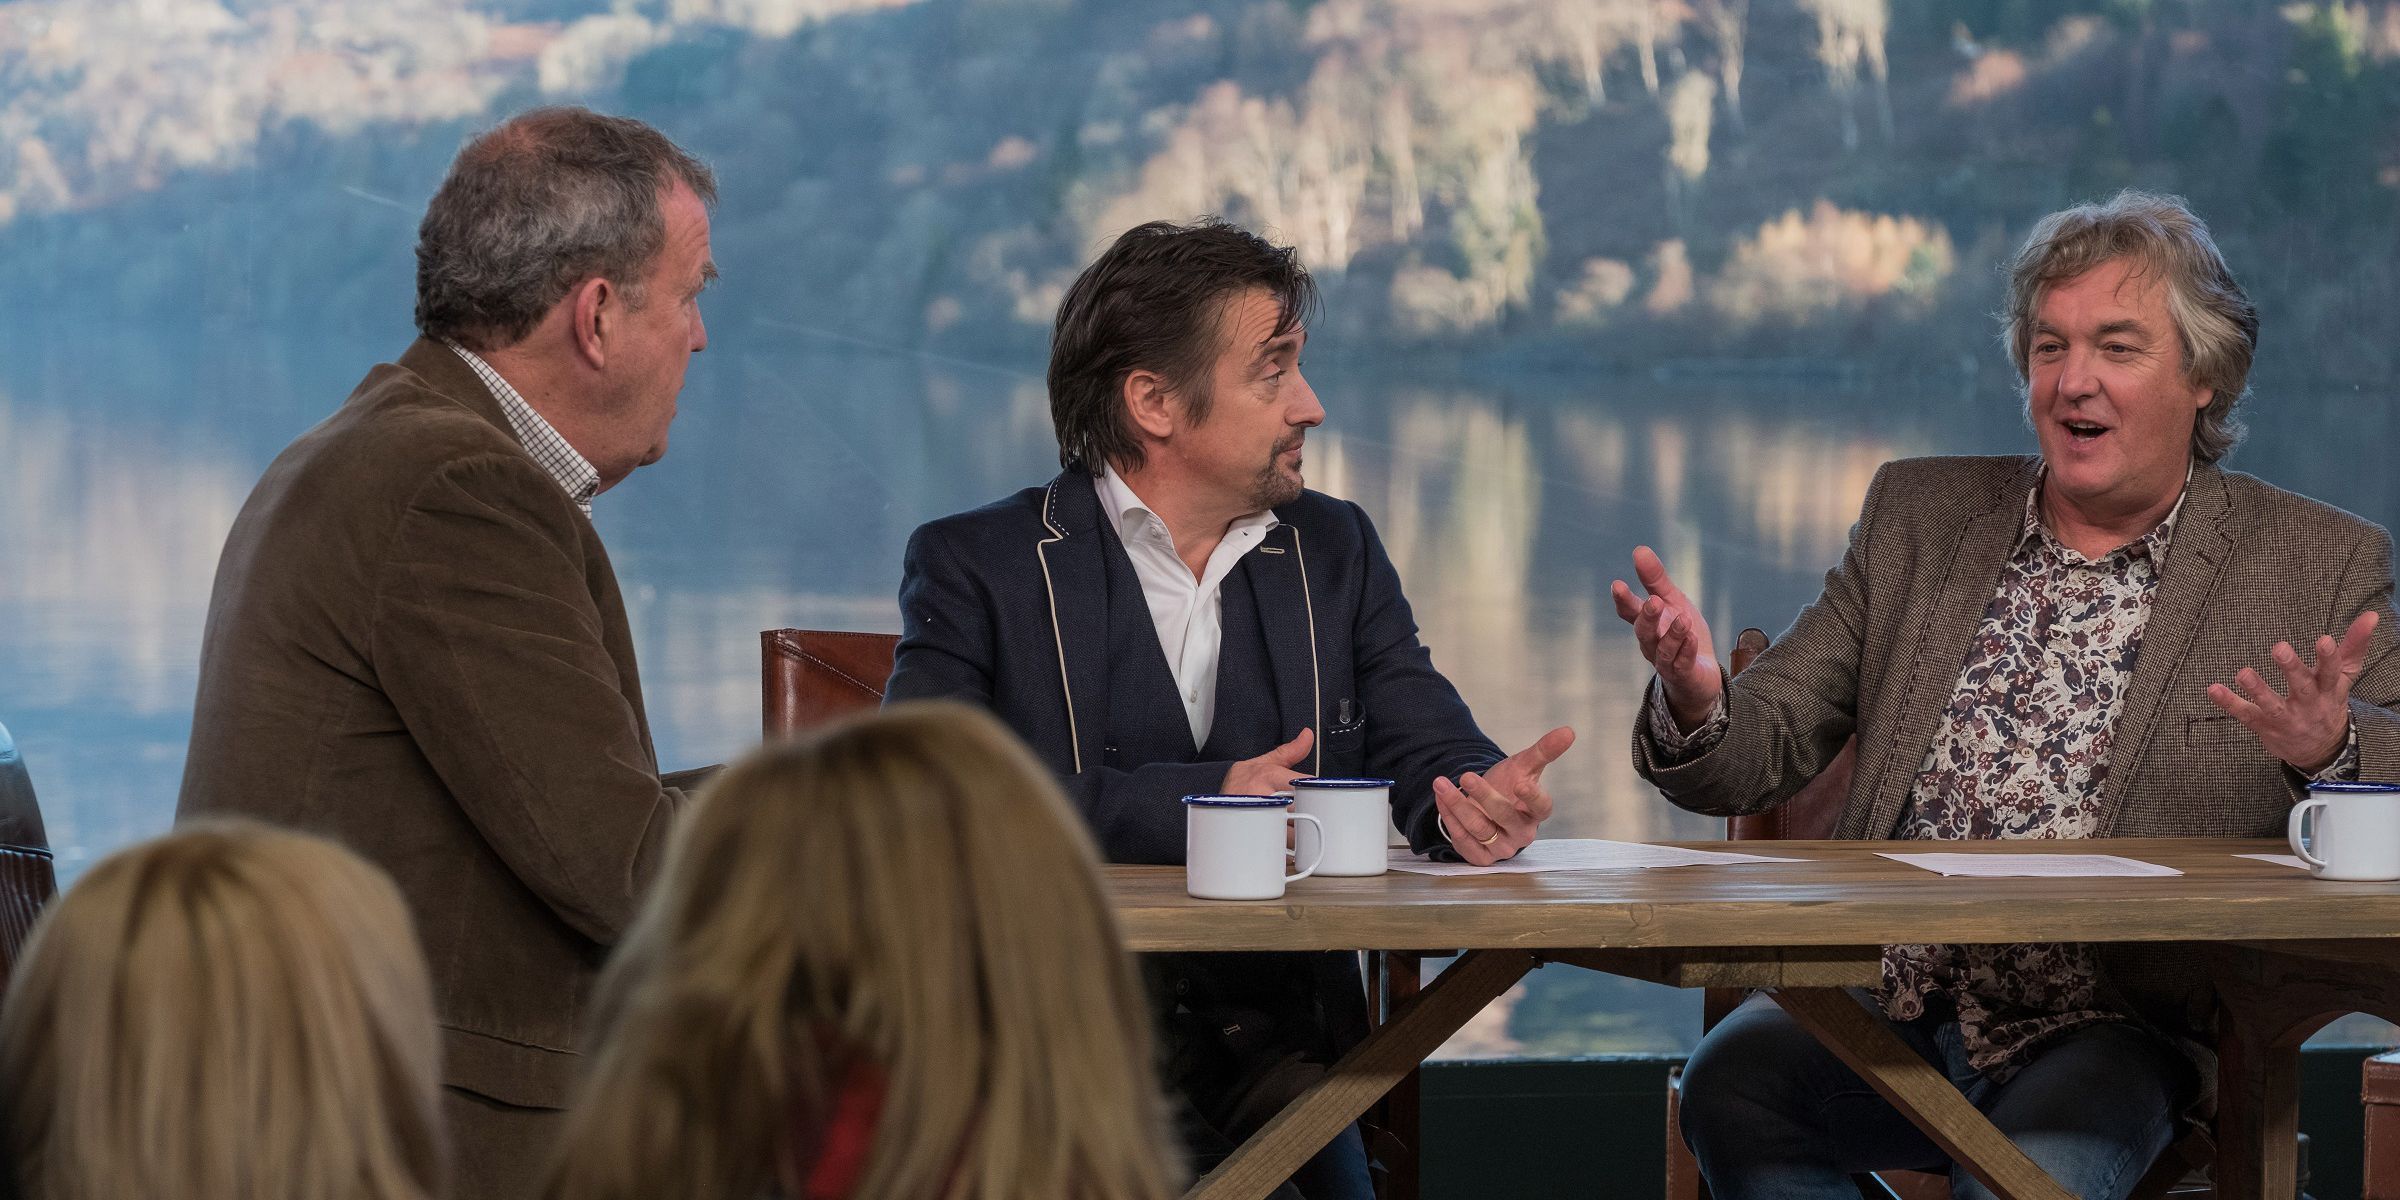 The Grand Tour Is Better, But Still Has Room to Grow